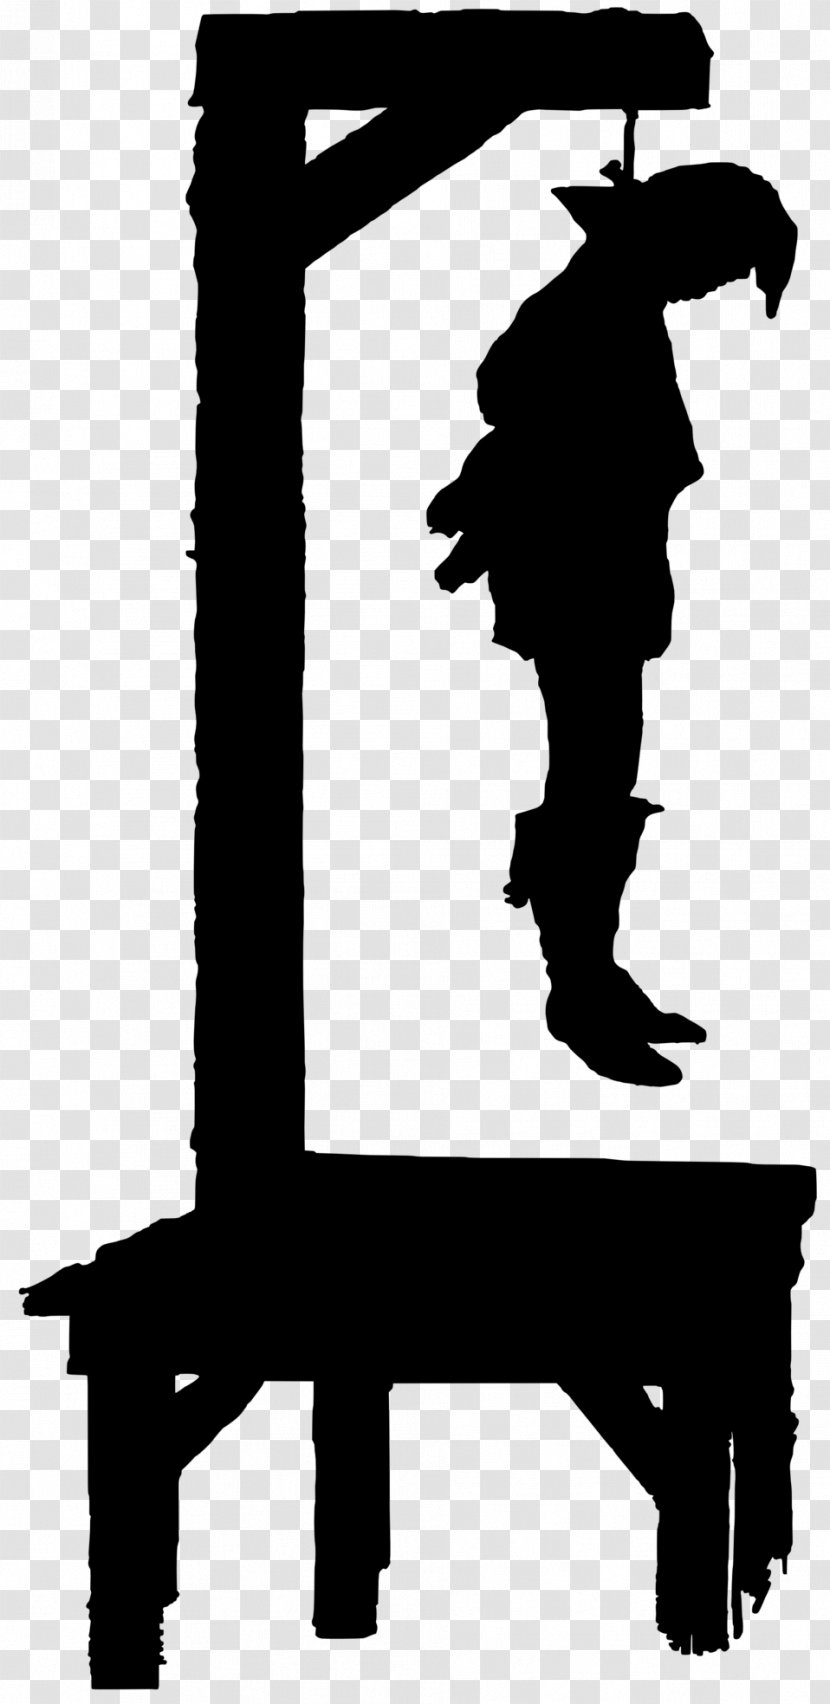 Hanging Capital Punishment Execution Clip Art - Black And White - By Firing Squad Transparent PNG